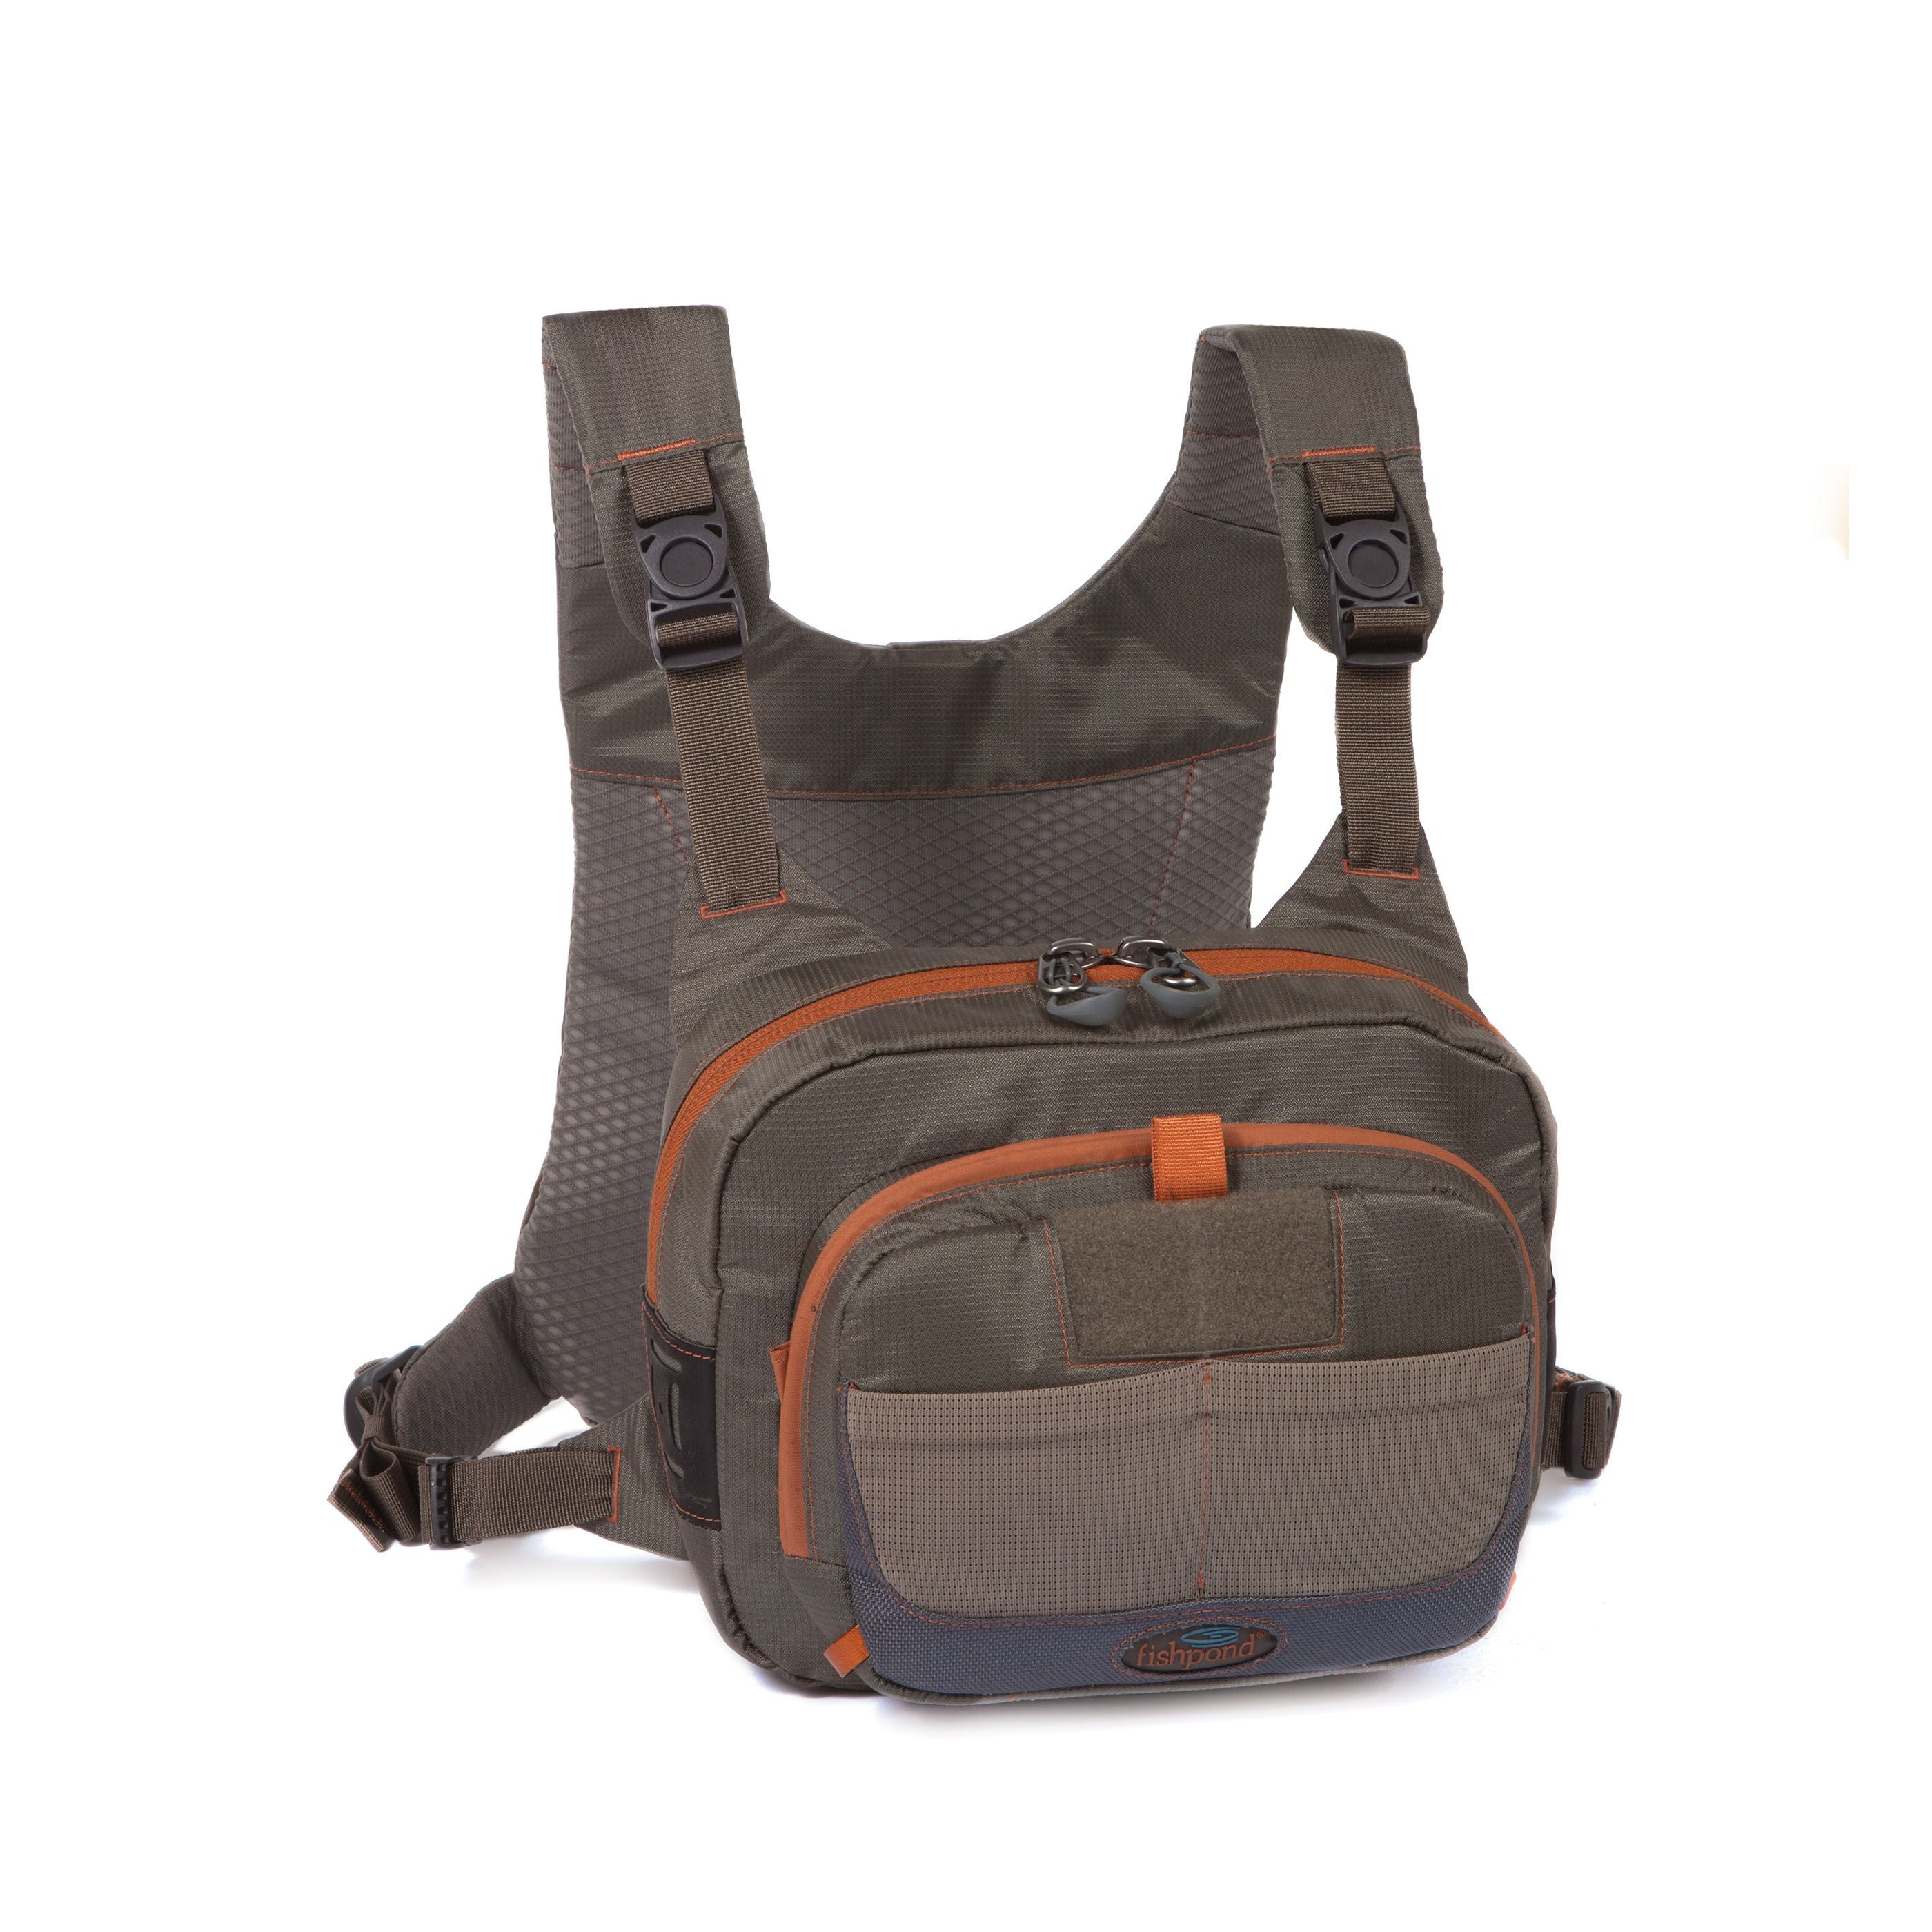 FISHPOND CROSS CURRENT CHEST PACK SYSTEM — Rod And Tackle Limited